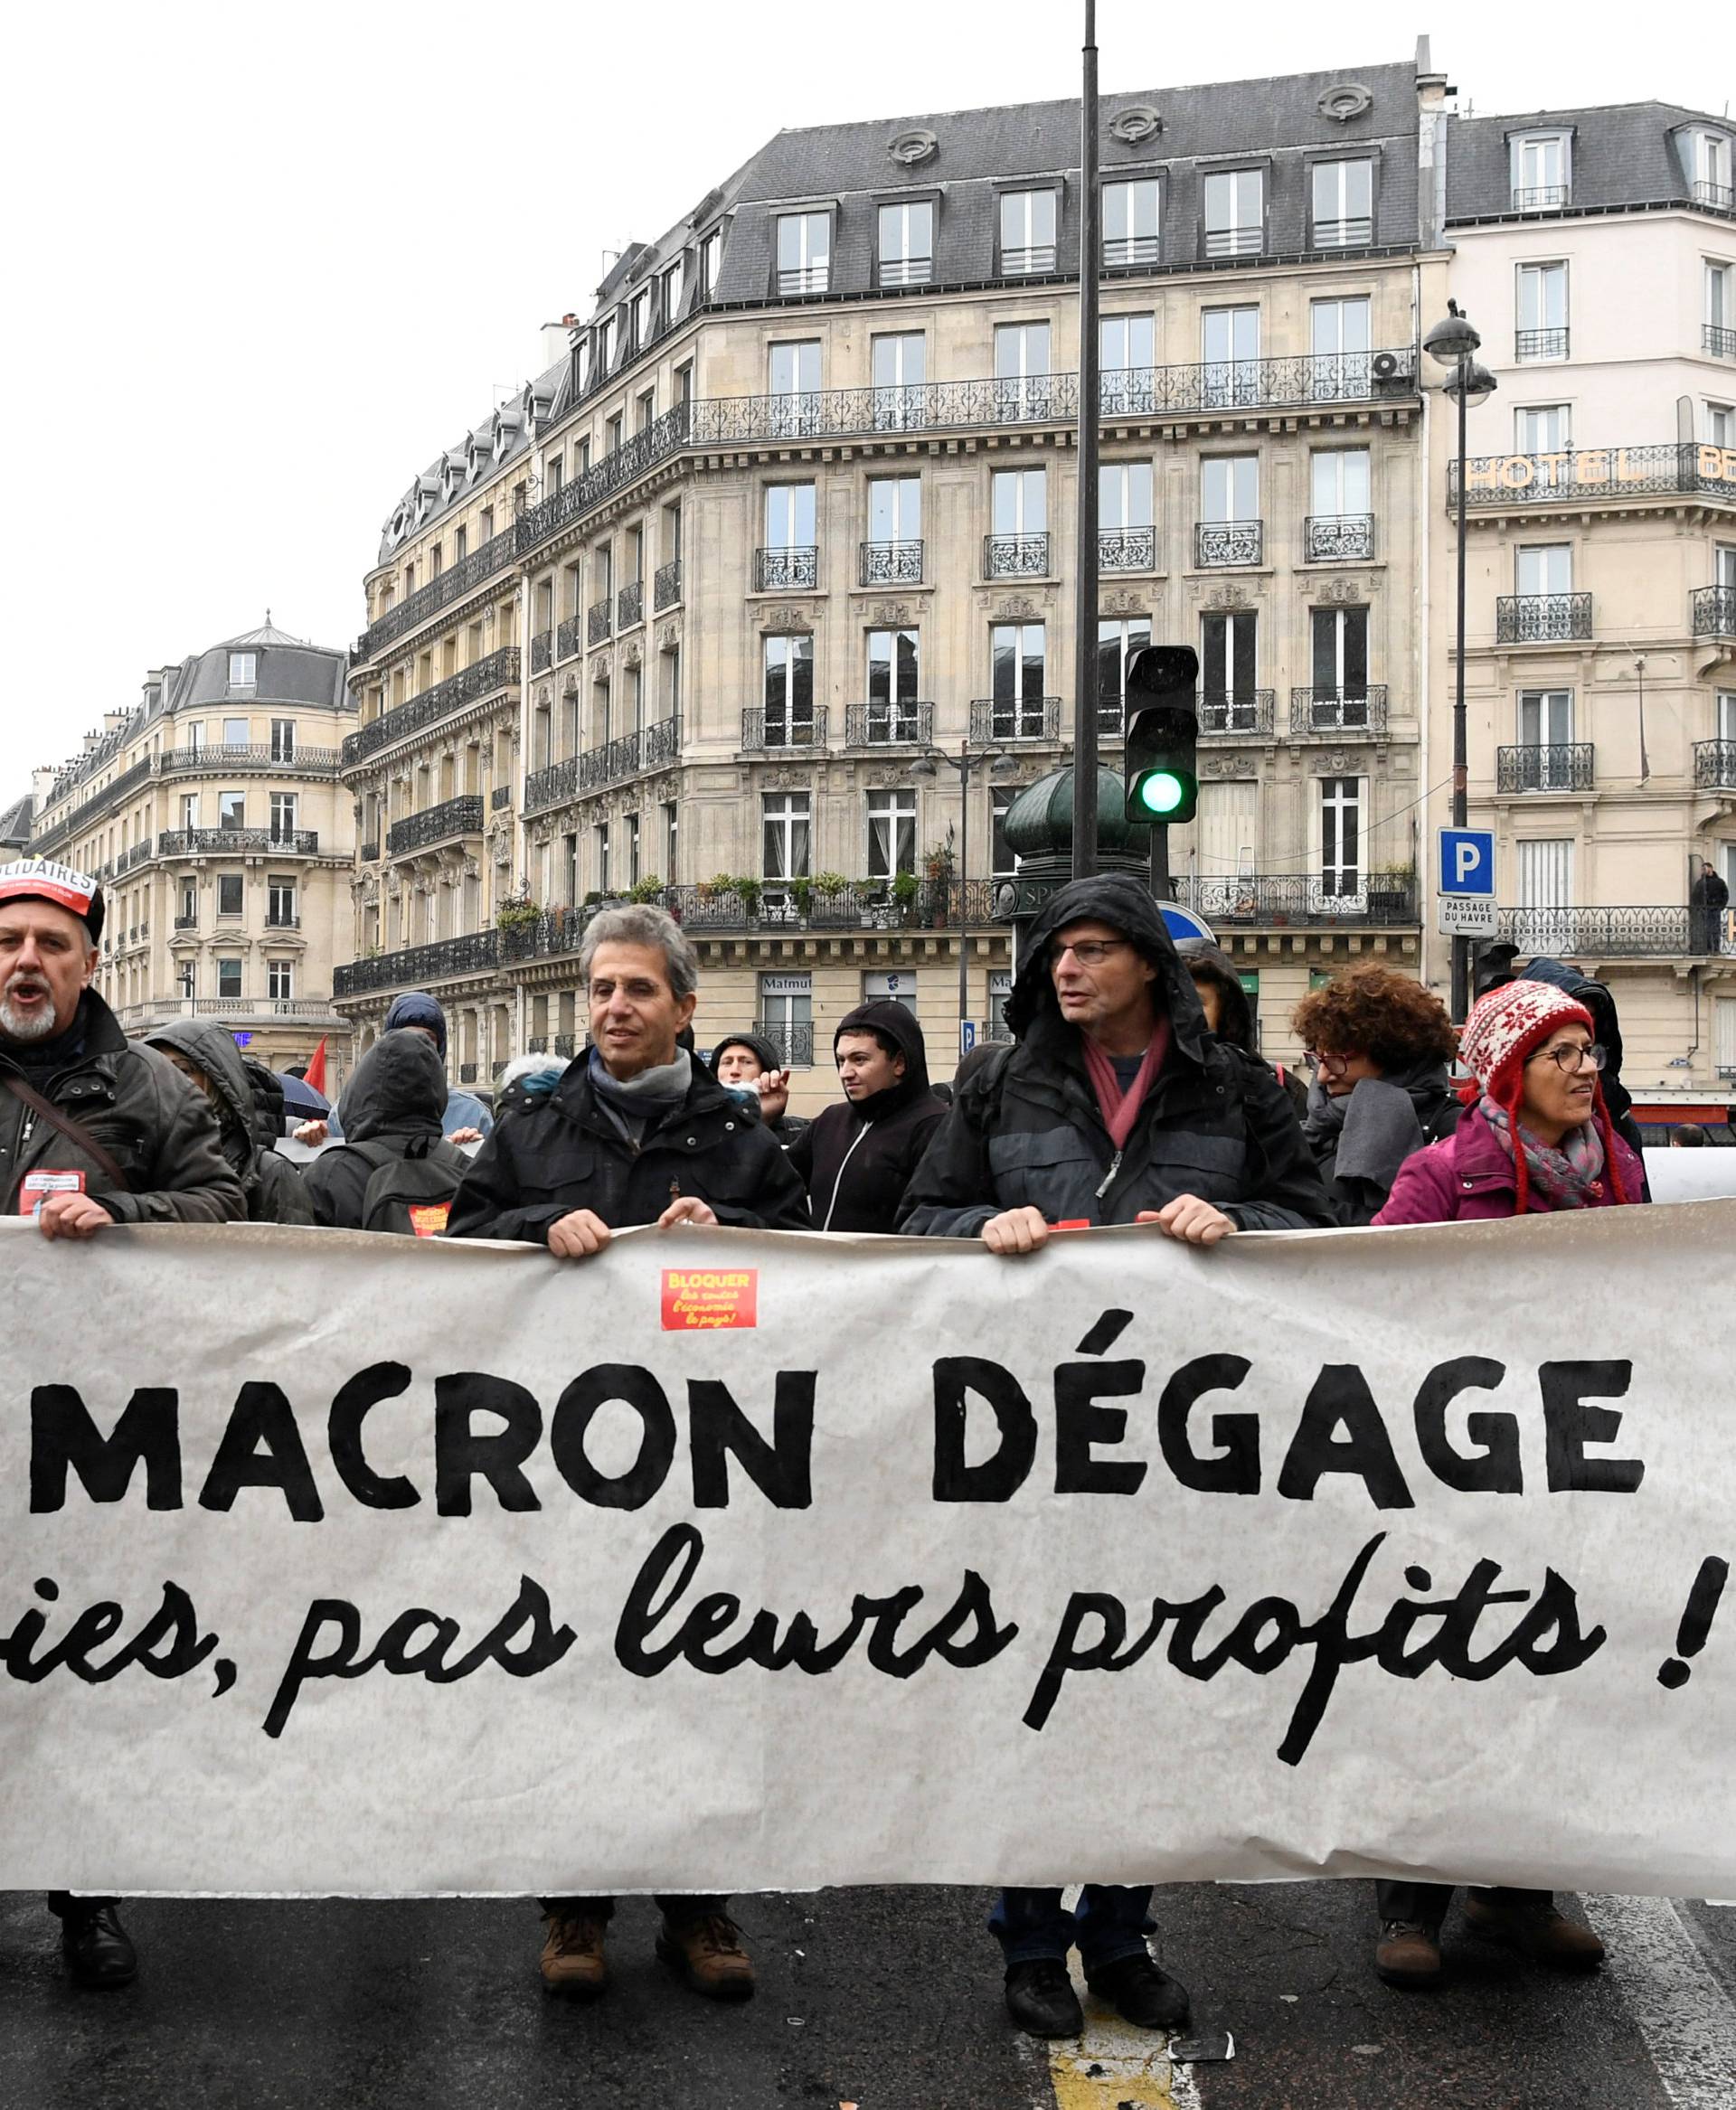 People hold a banner which reads "Macron get out, our lives, not our profits" as they demonstrate in a street during a national day of protest by the "yellow vests" movement in Paris